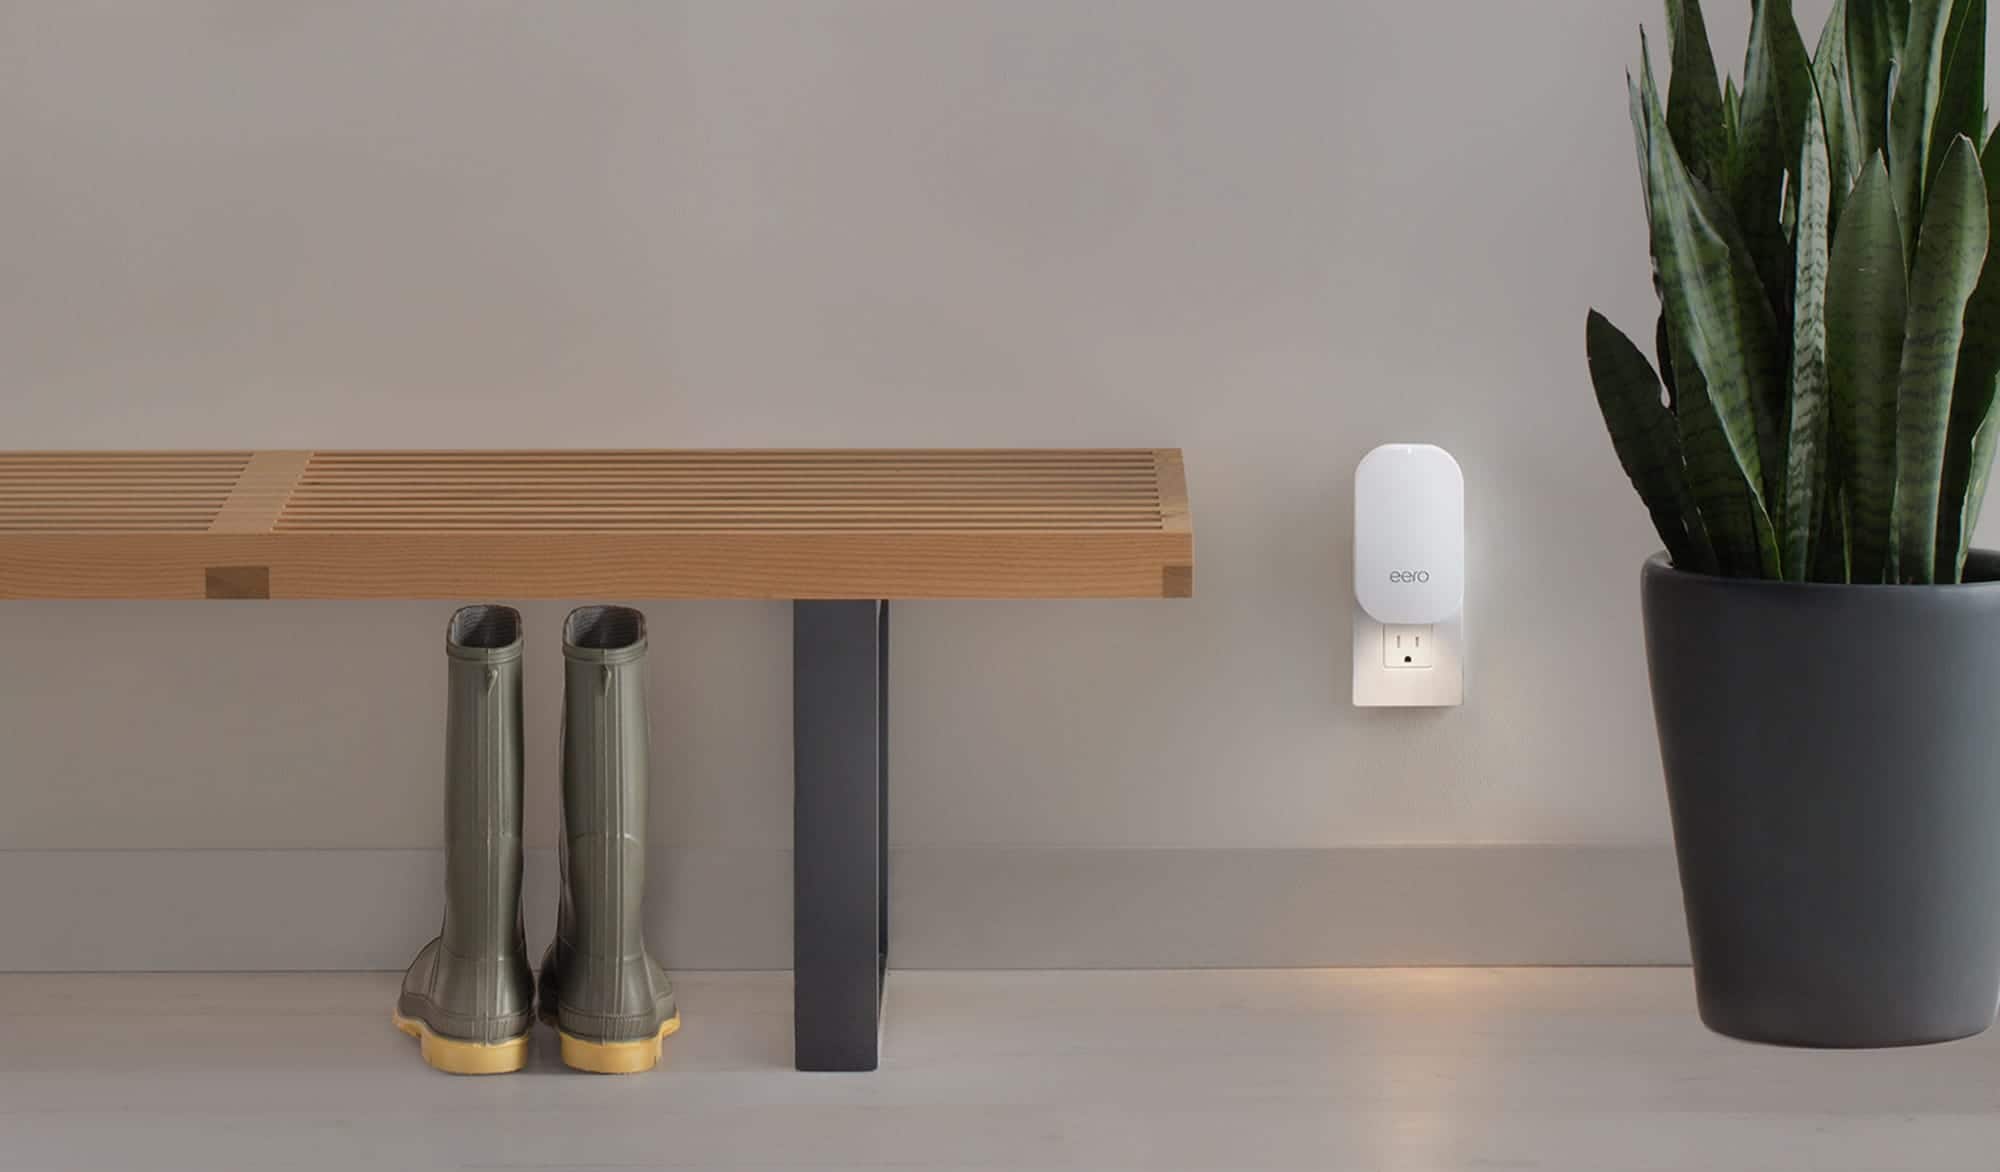 eero Beacon plugged into an outlet with nightlight on